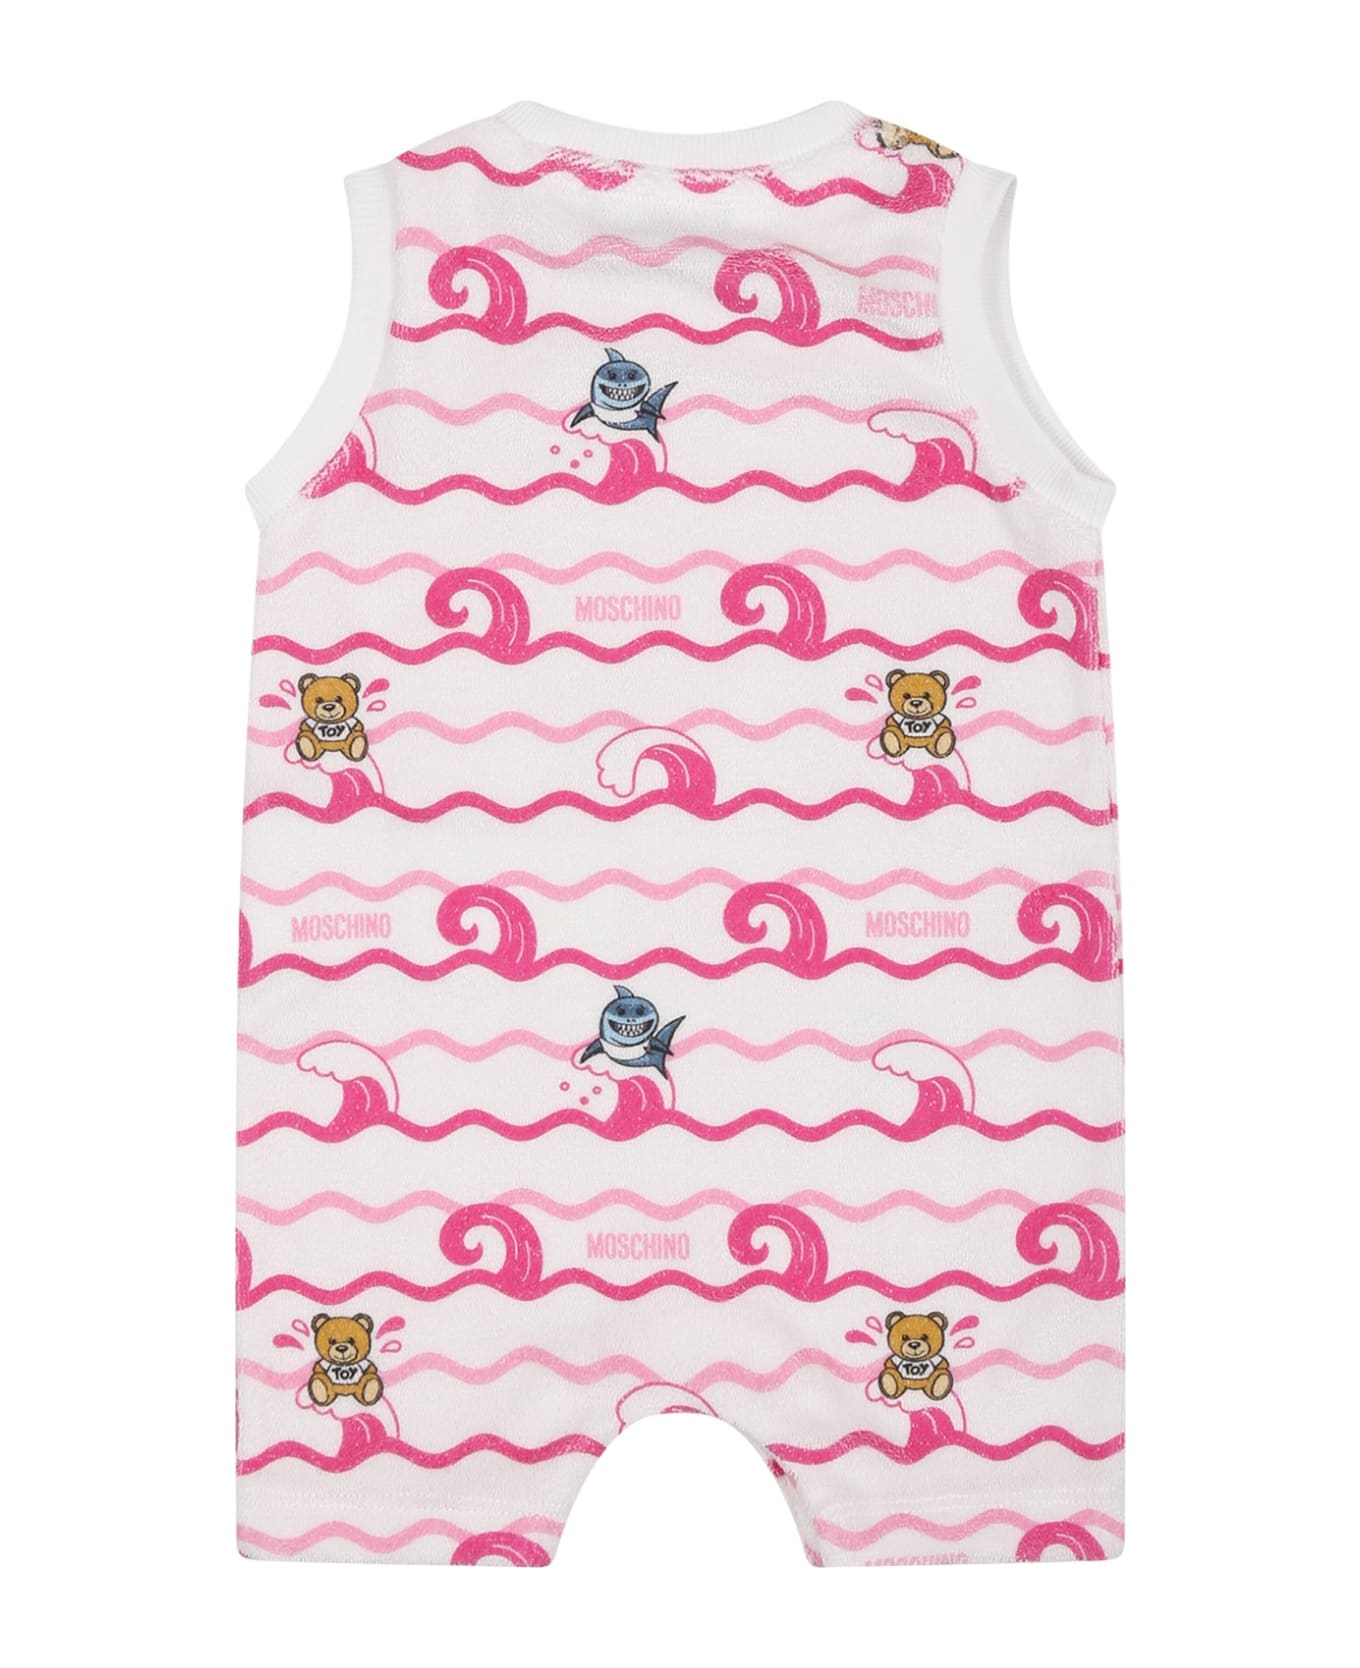 Moschino Pink Set For Baby Girl With Print And Teddy Bear - Pink